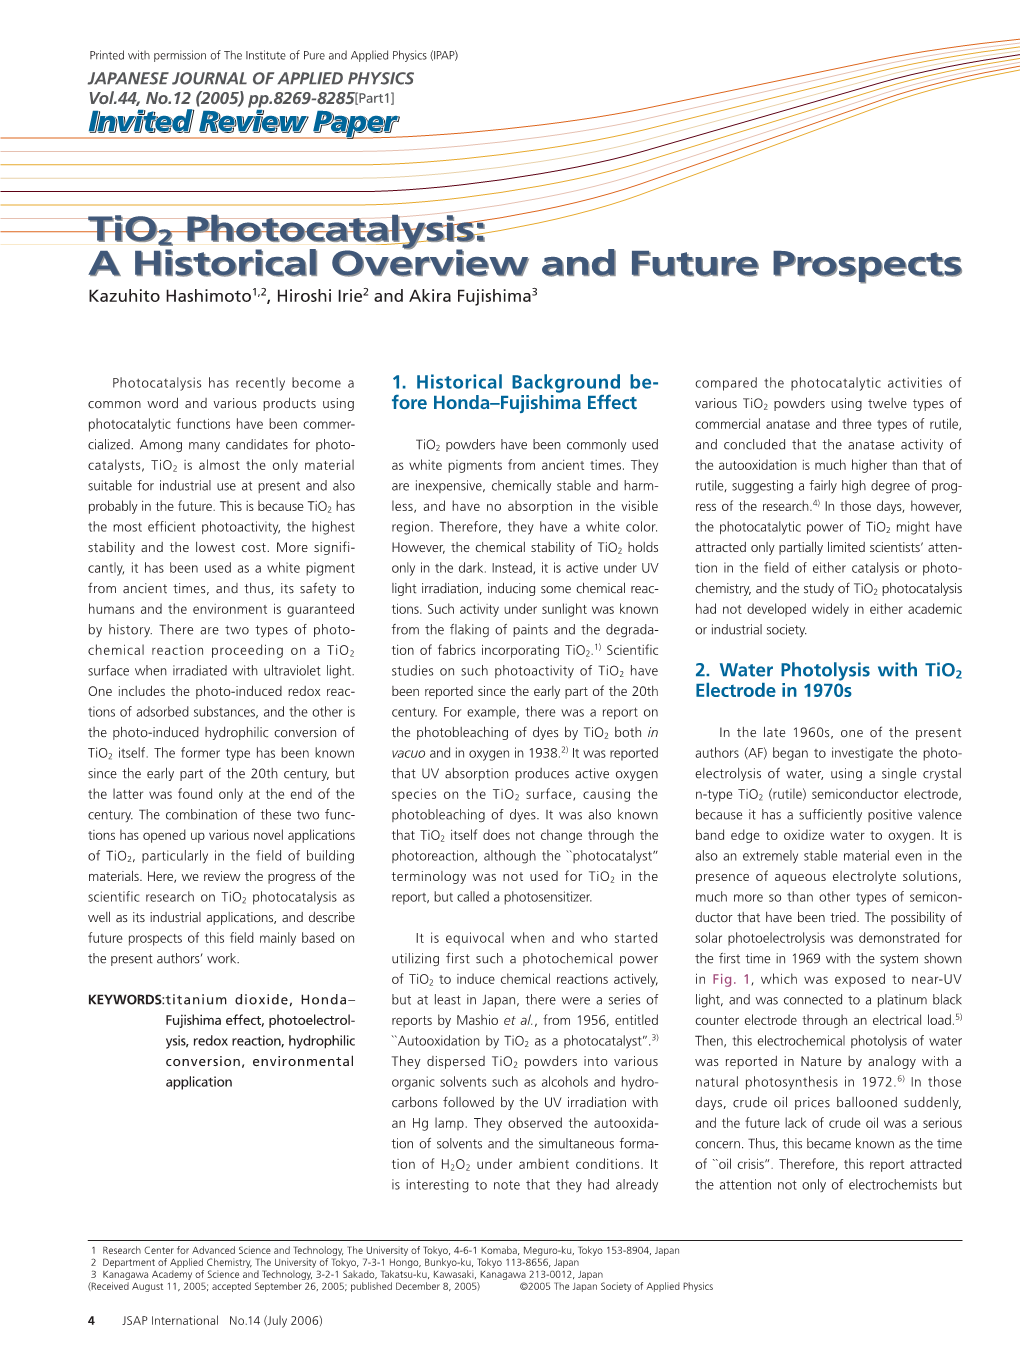 Tio2 Photocatalysis: a Historical Overview and Future Prospects Tio2 Photocatalysis: a Historical Overview and Future Prospects